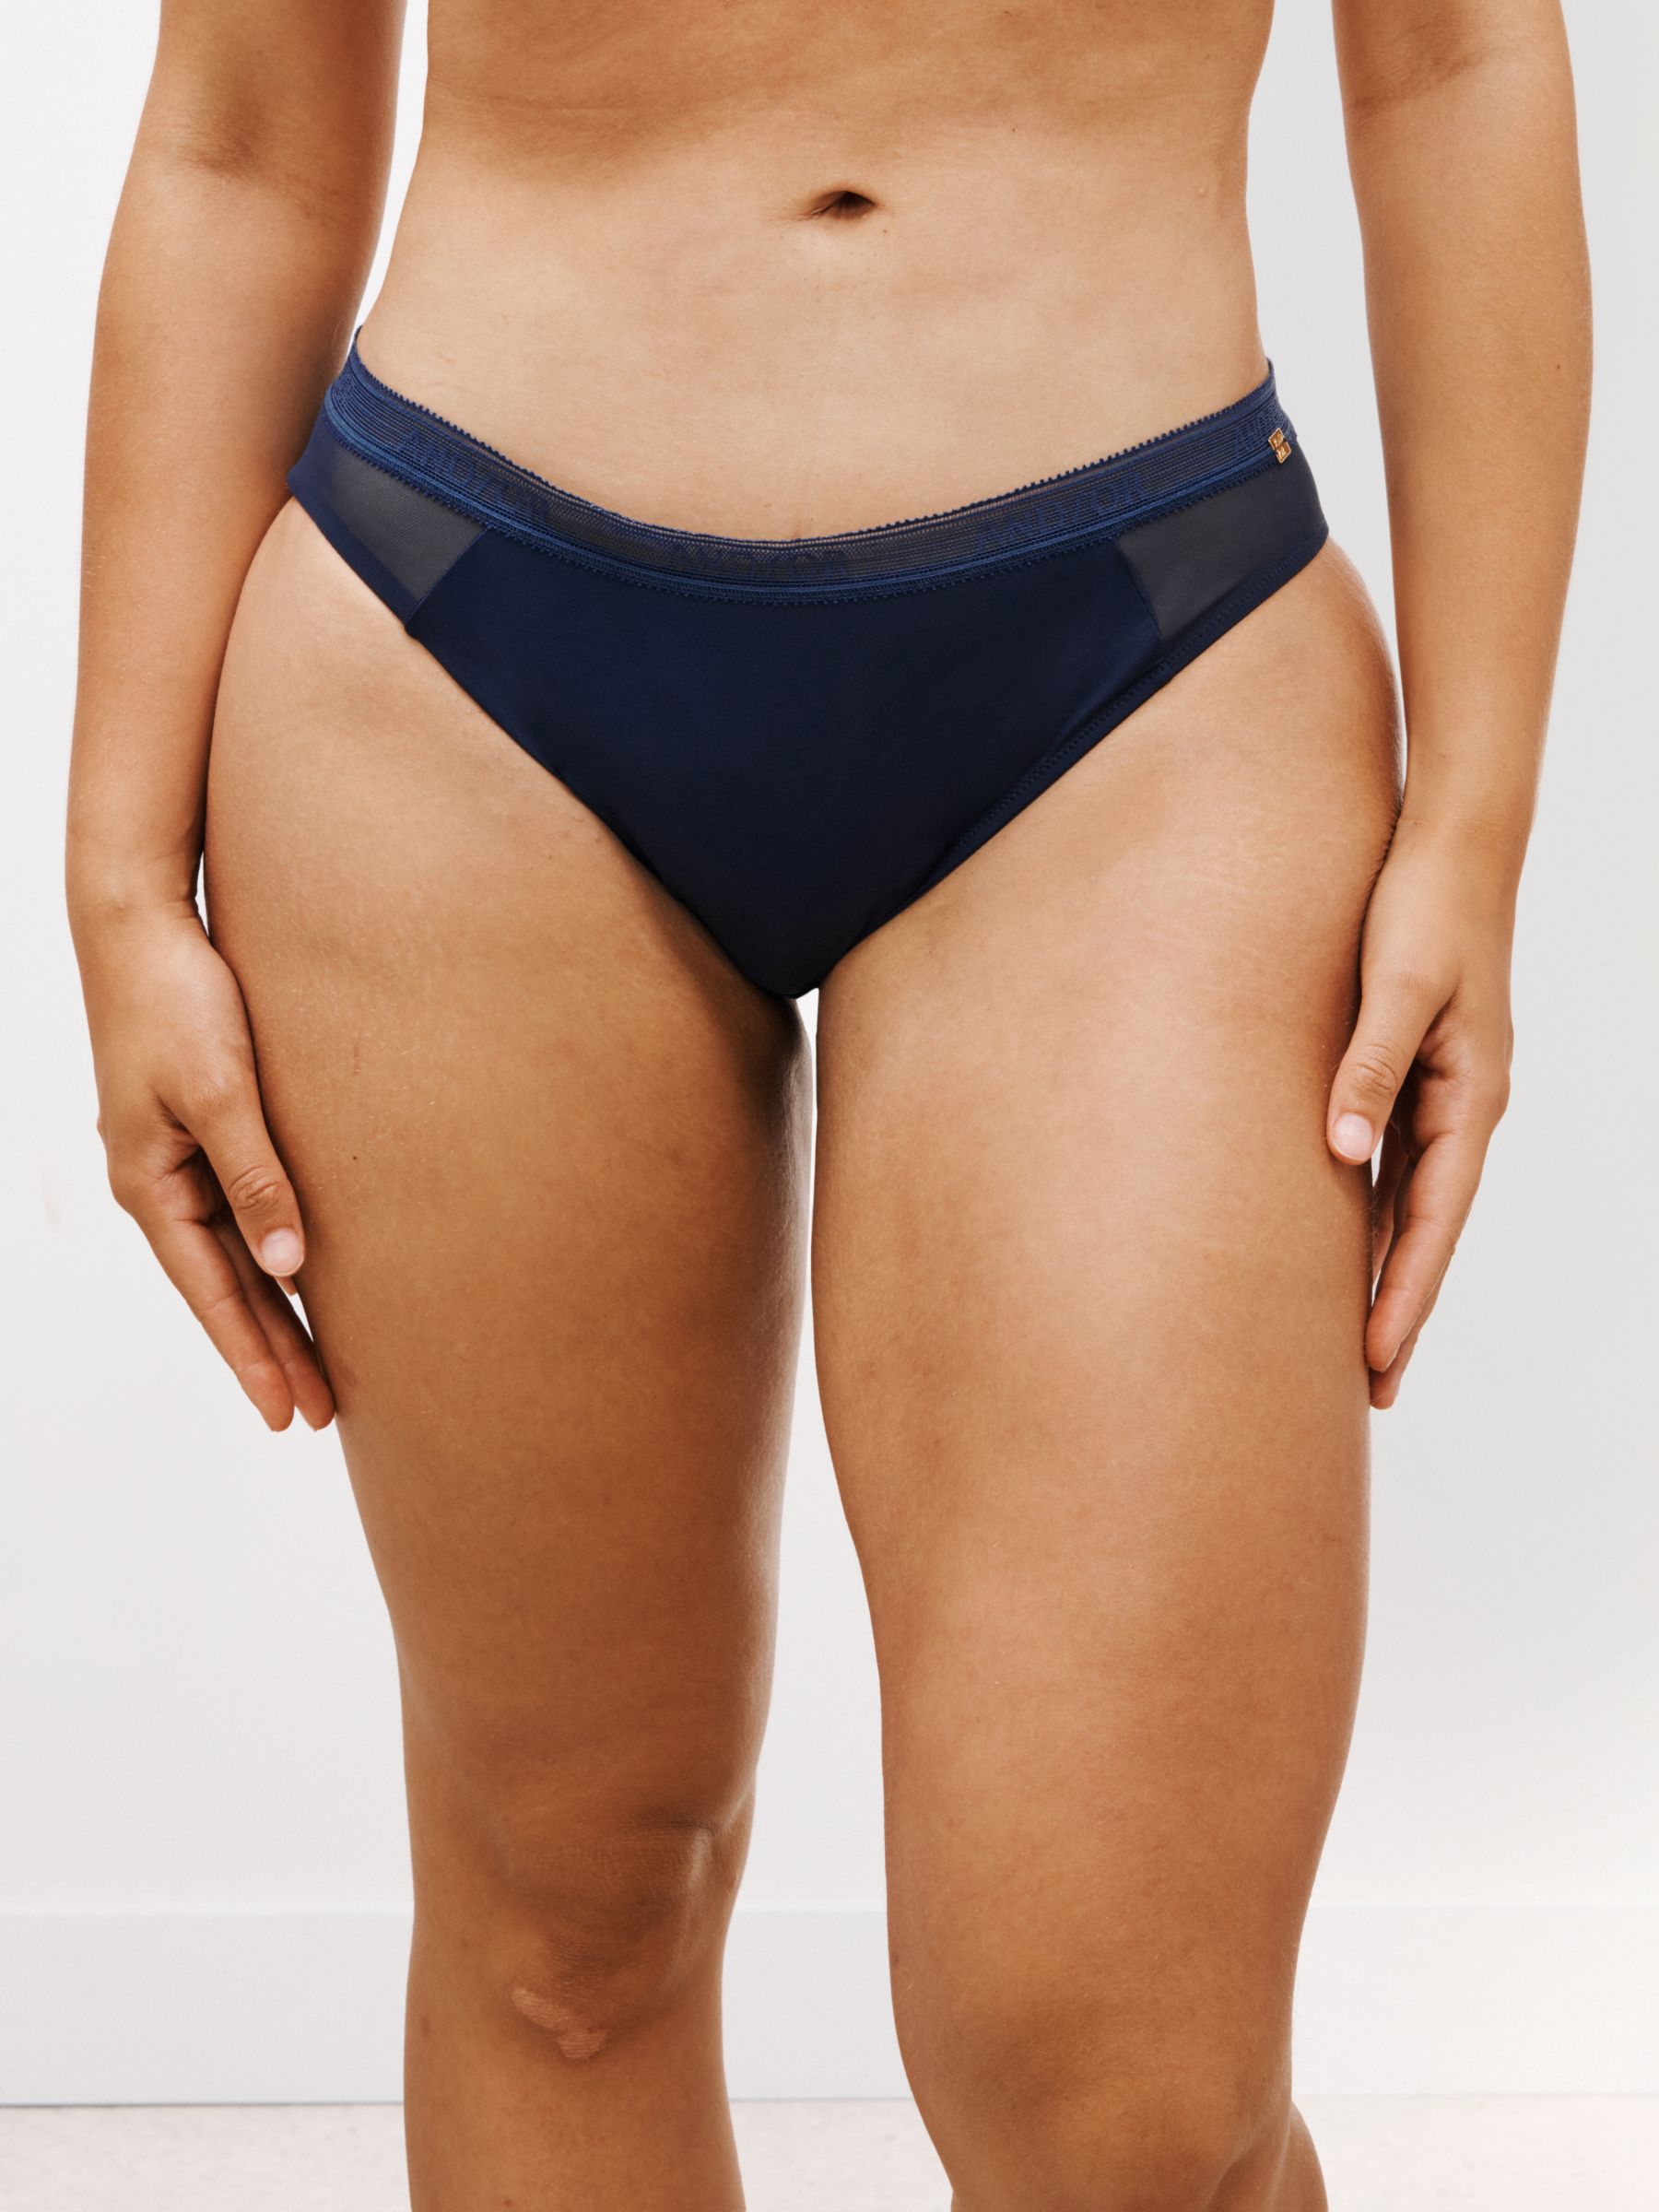 AND/OR Fleur Bikini Knickers, Navy at John Lewis & Partners